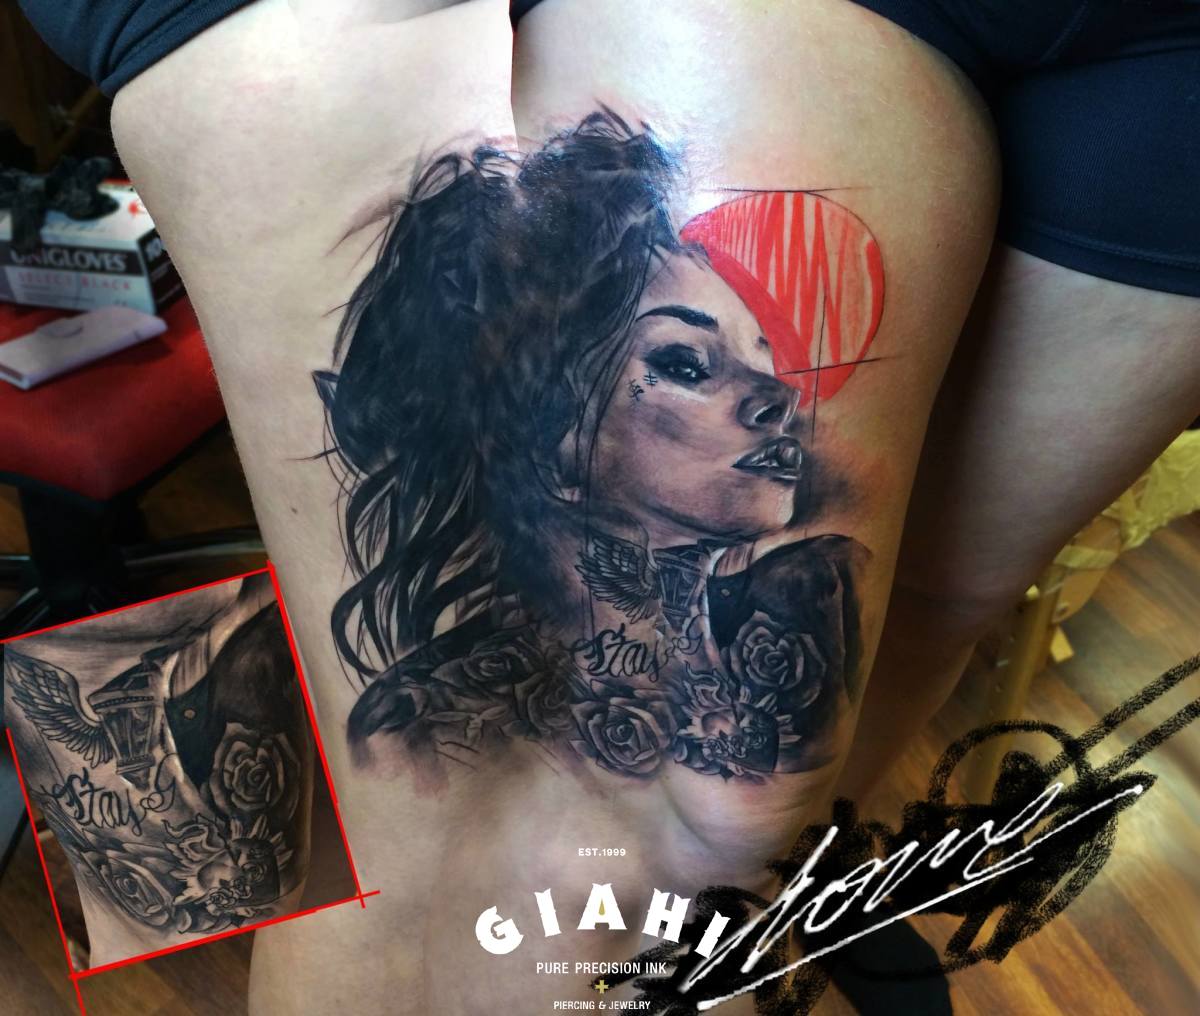 Stay Girl tattoo by George Drone